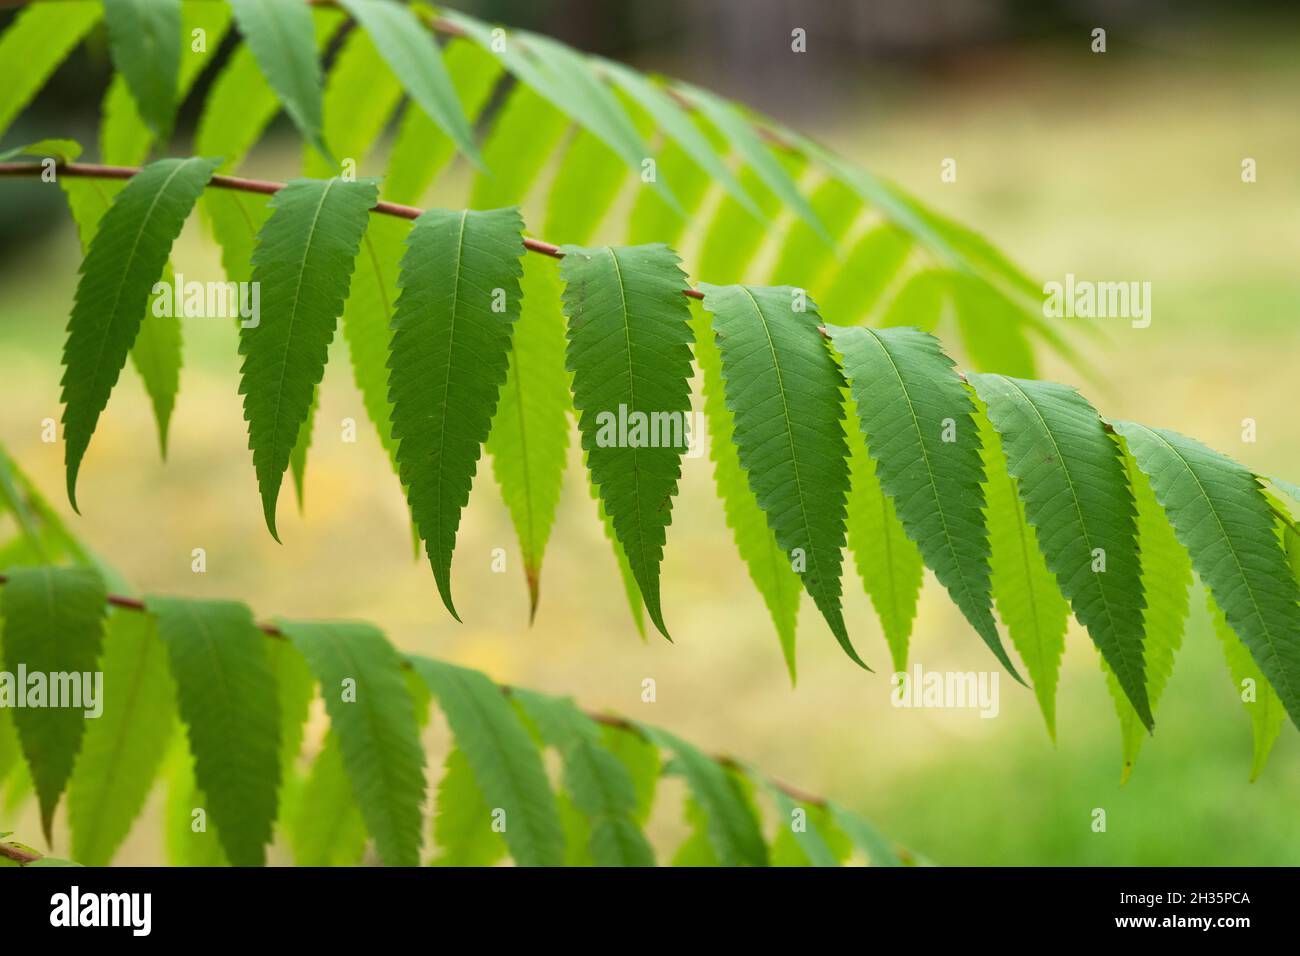 Rhus Typhina. Staghorn sumac or Stag's horn sumach plant foliage Stock Photo